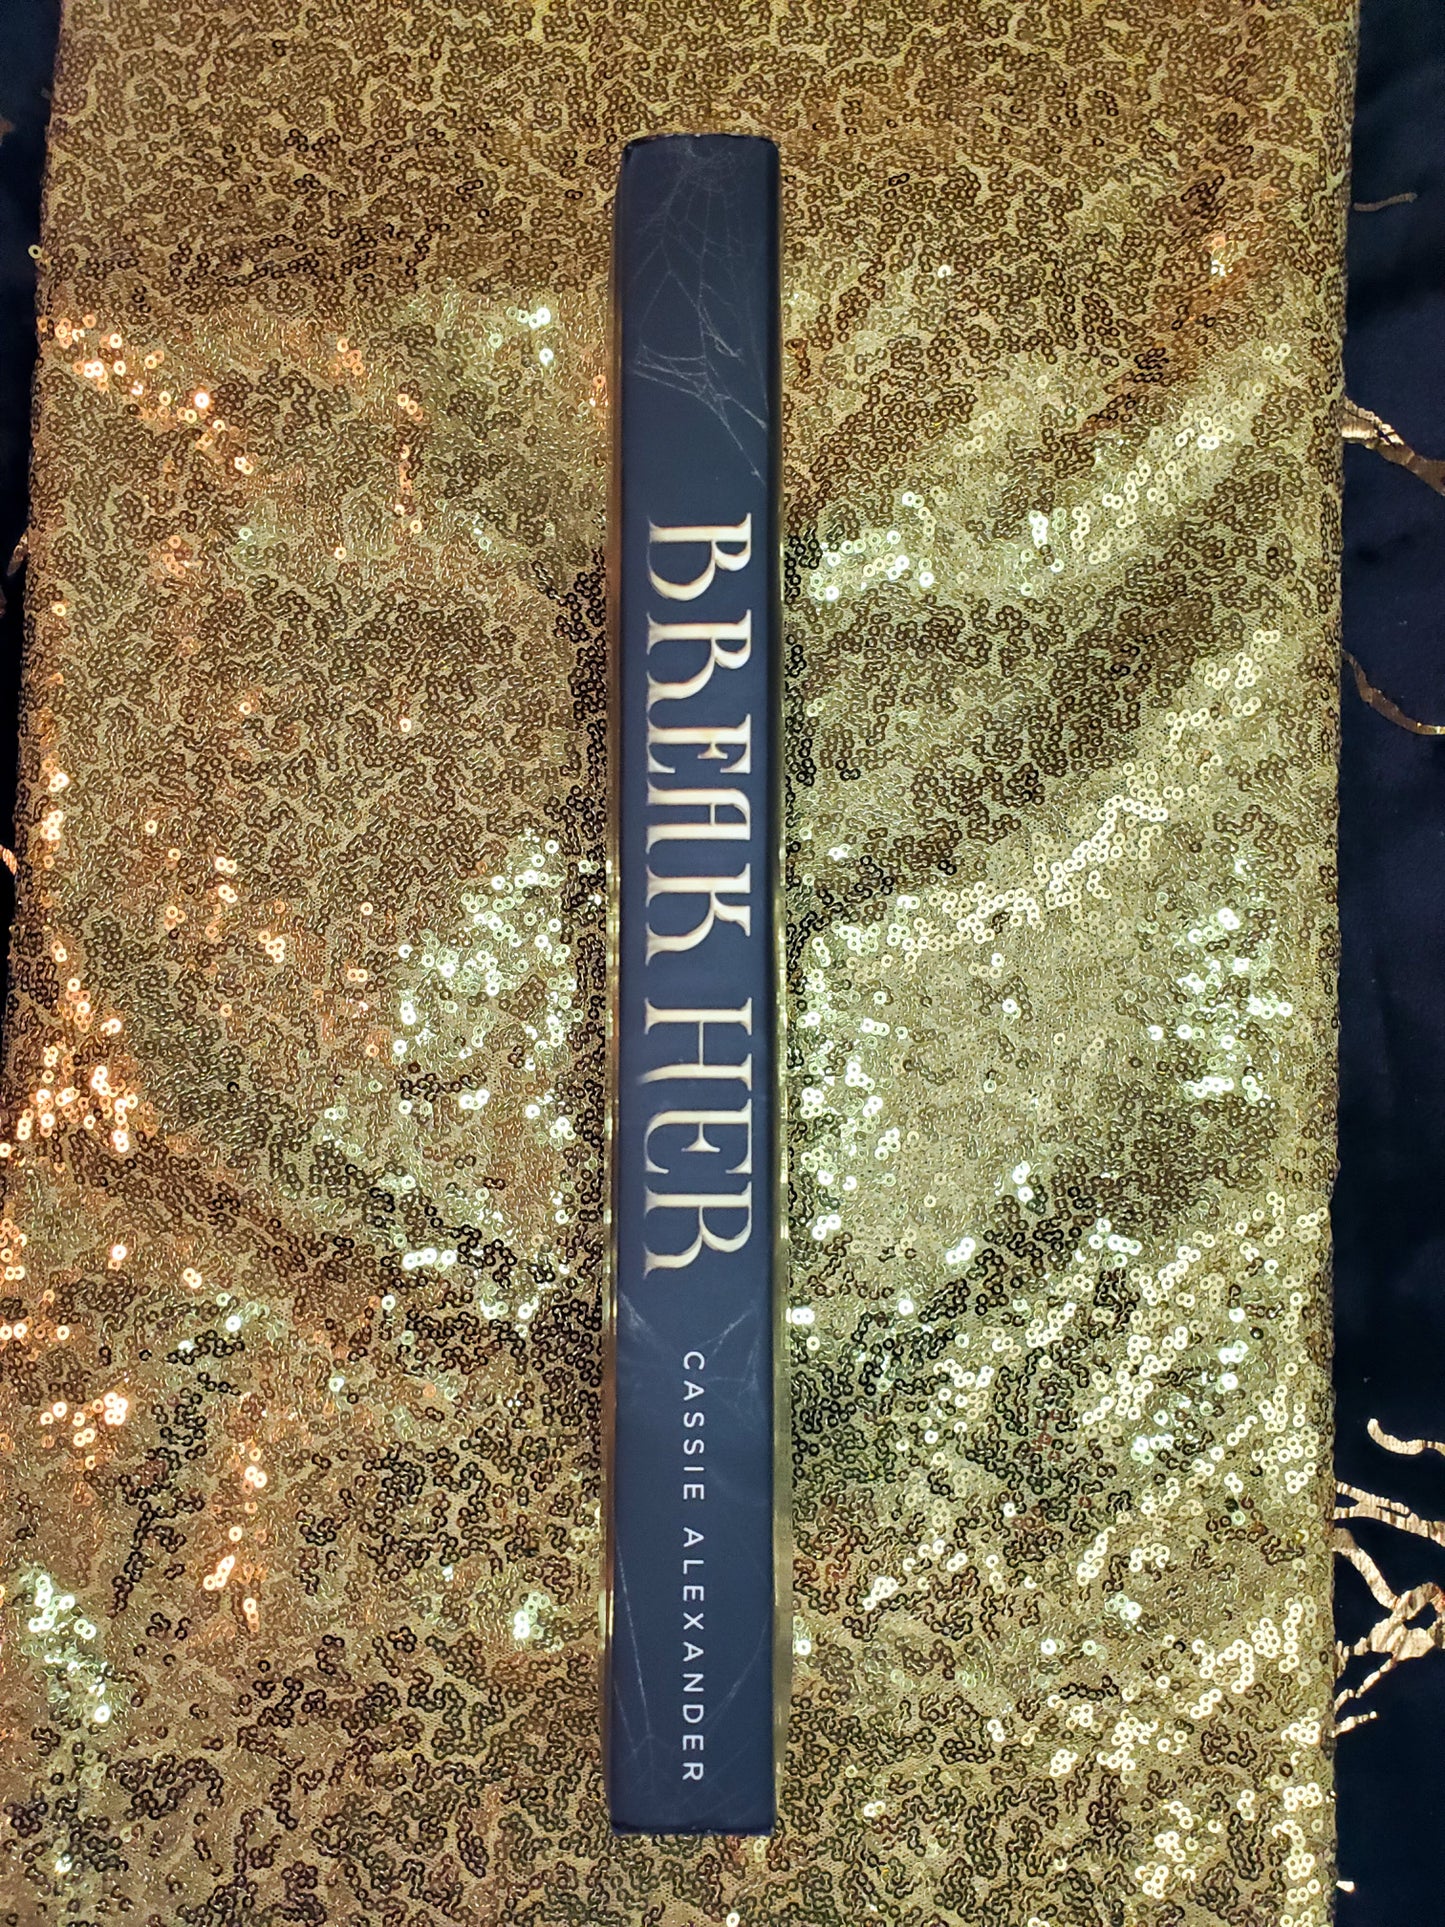 Hardcover of Break Her by Cassie Alexander on a gold sequined background. Image shows the spine.